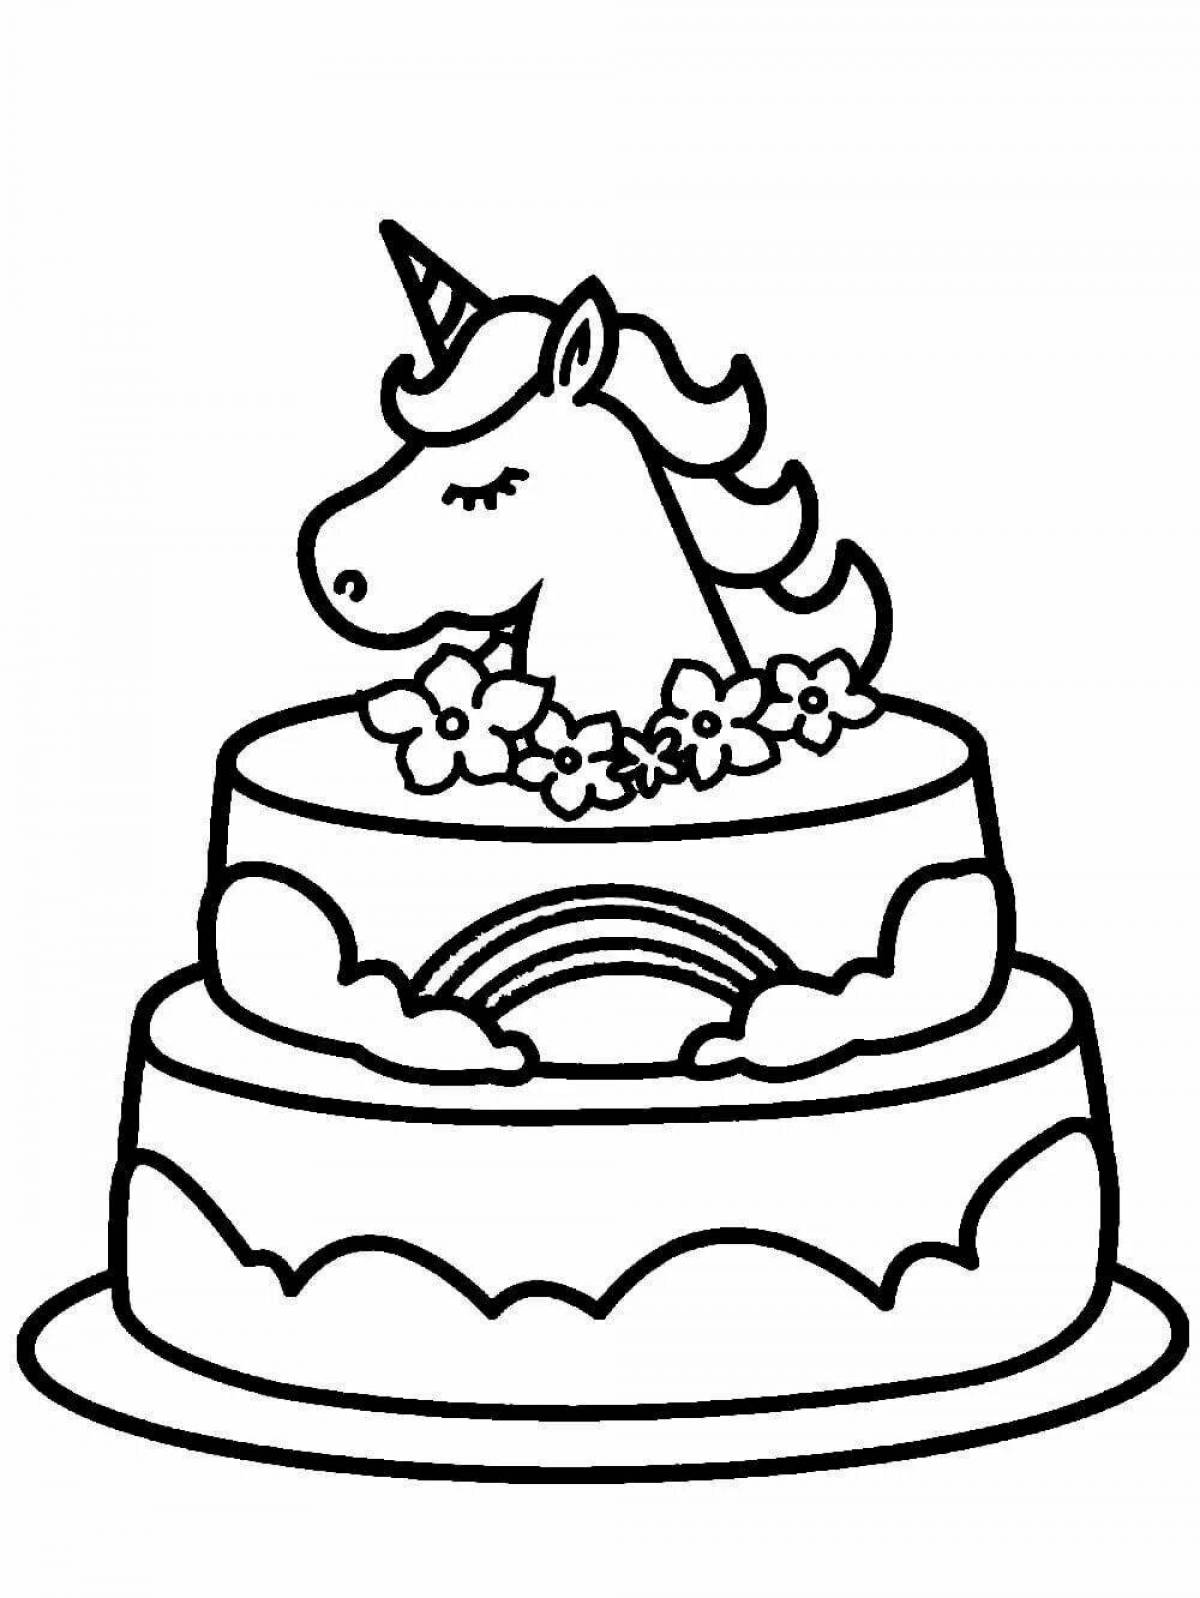 Delicious cake coloring pages for girls